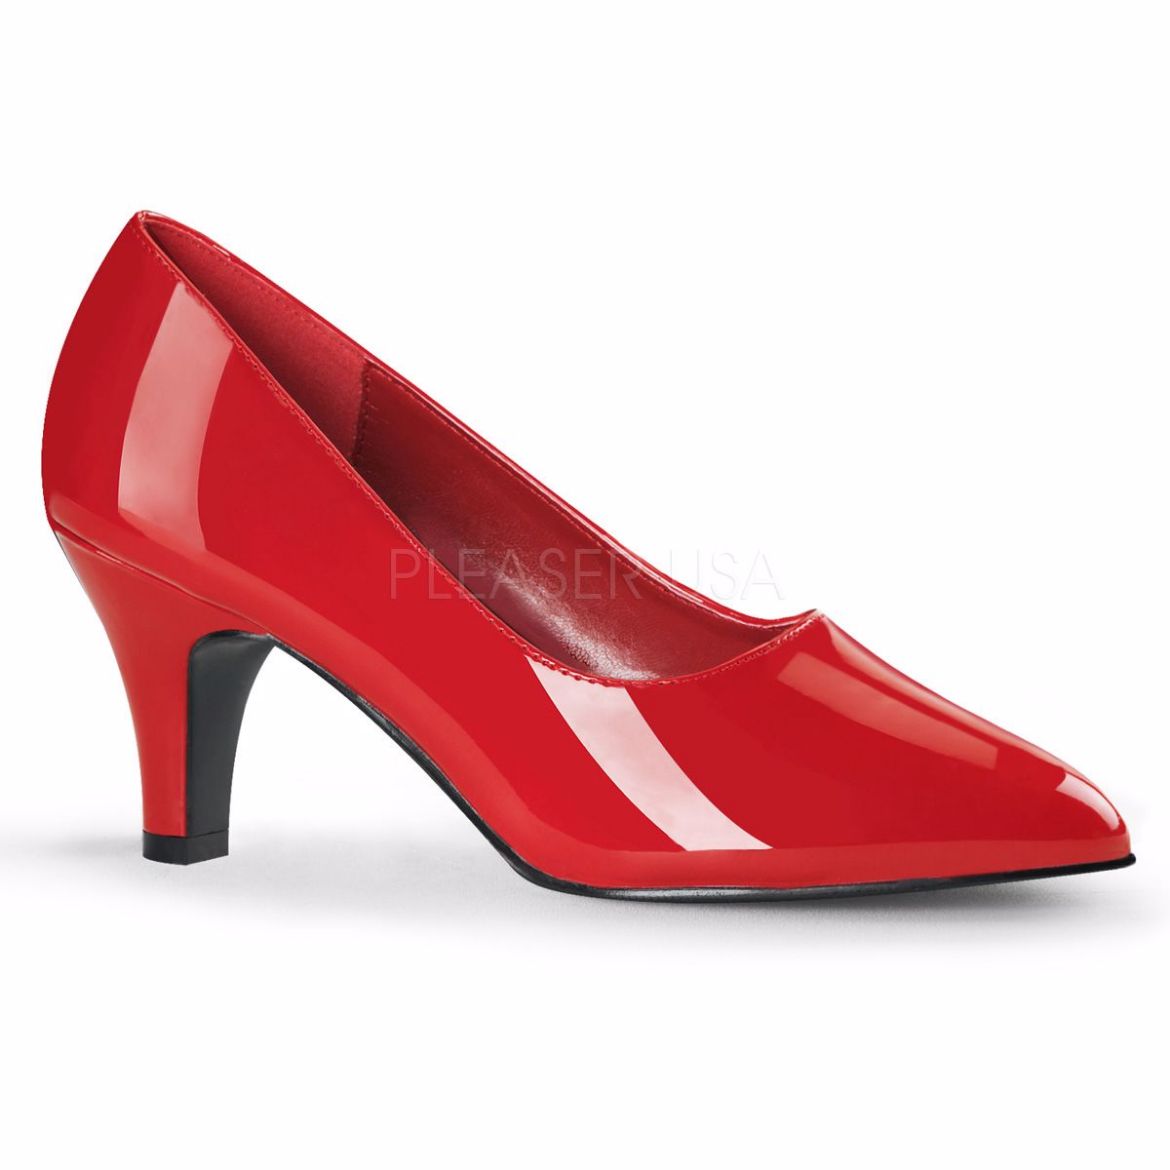 Product image of Pleaser Pink Label Divine-420 Red Patent, 3 inch (7.6 cm) Heel Court Pump Shoes